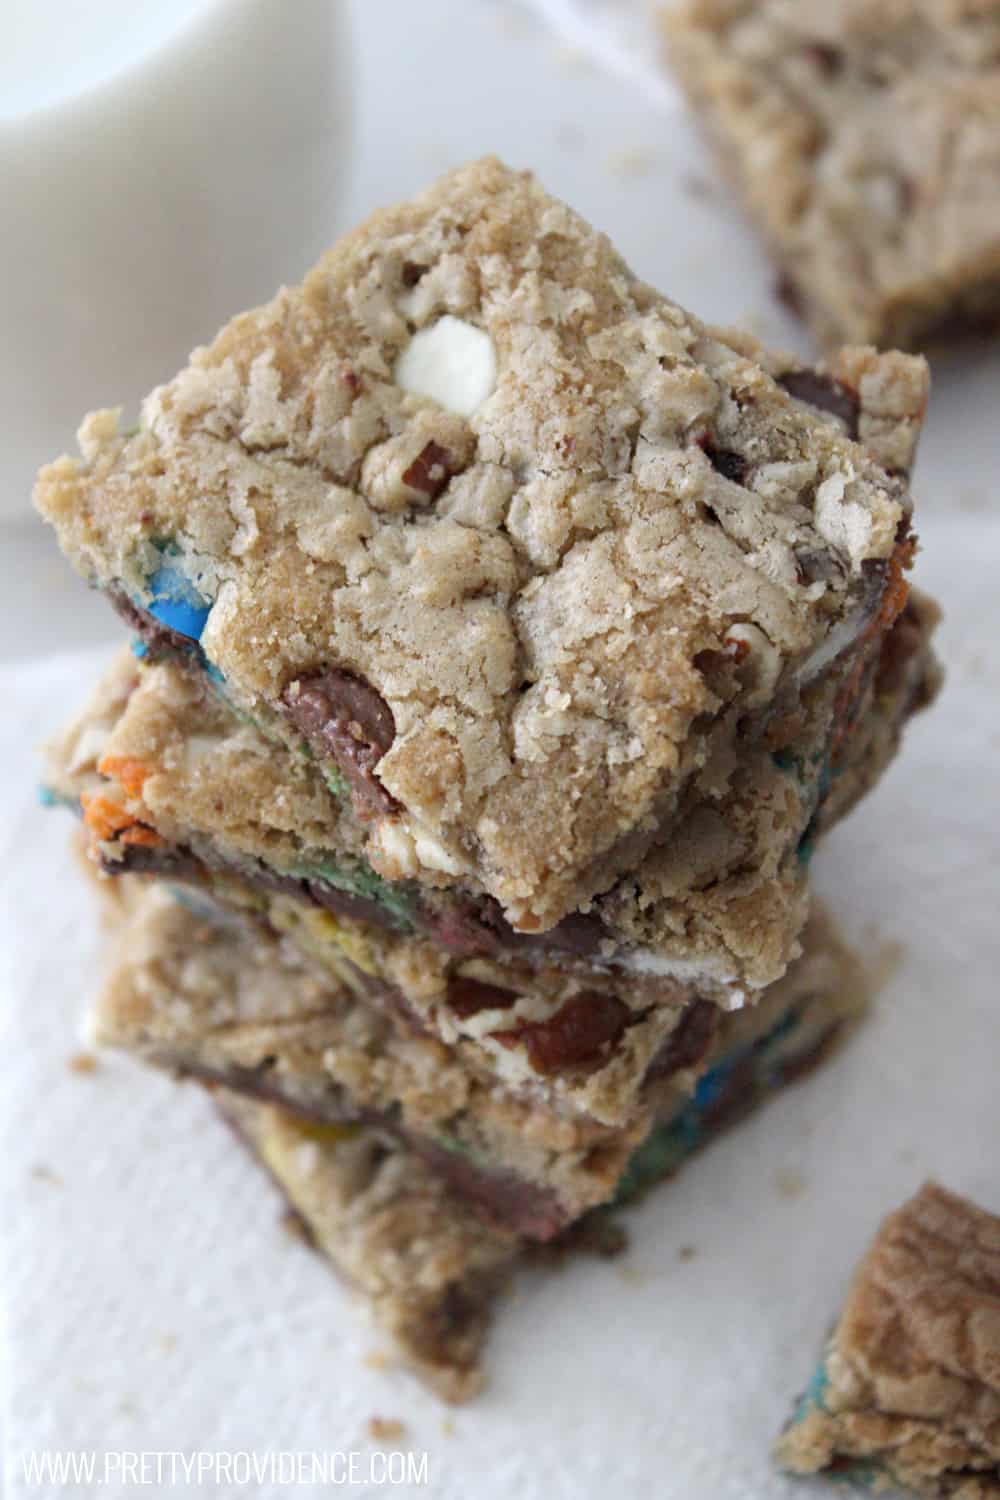 These loaded cookie bars are unbelievable amazing! Super easy to whip up and this recipe makes a ton! 